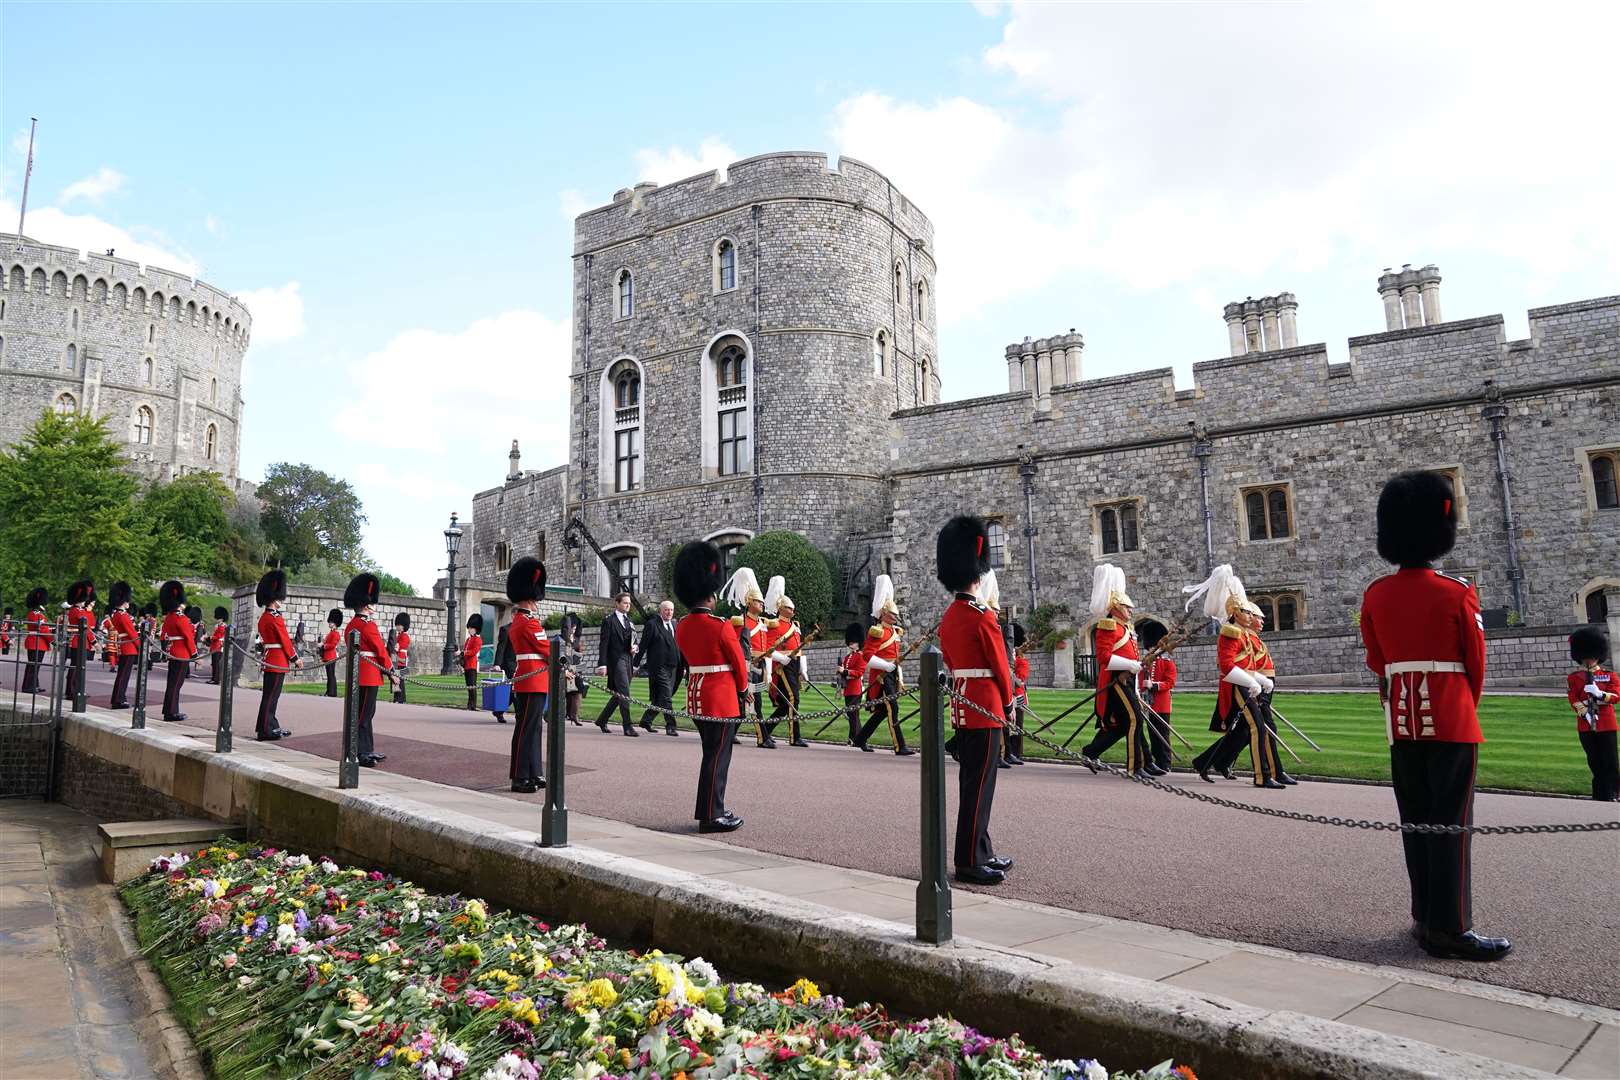 Soldiers from the Grenadier Guards outside St George’s Chapel in Windsor Castle (Kirsty O’Connor/PA)